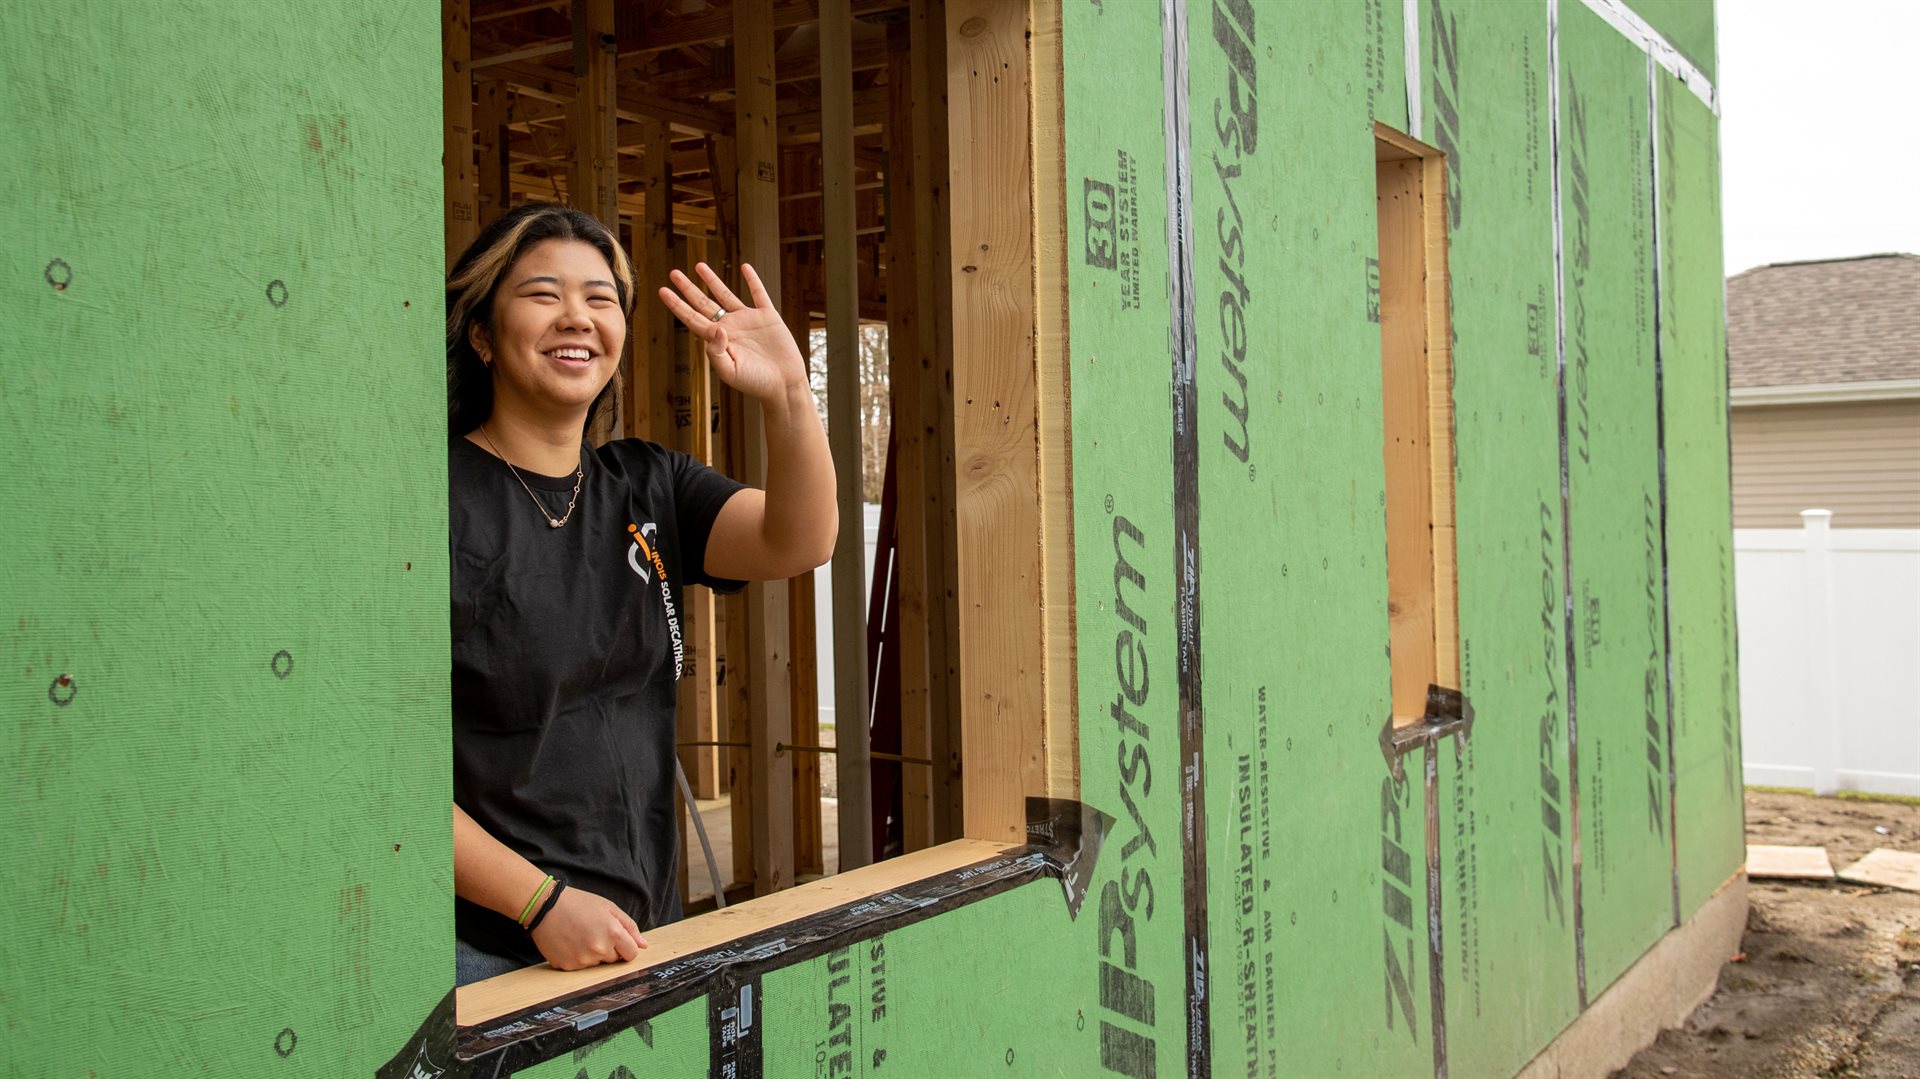 Julie Wang, a Global Studies major in the College of Liberal Arts and Sciences and&amp;amp;amp;amp;amp;amp;nbsp;who serves as ISD's Communications Director, waves from a window during a visit to the construction site.